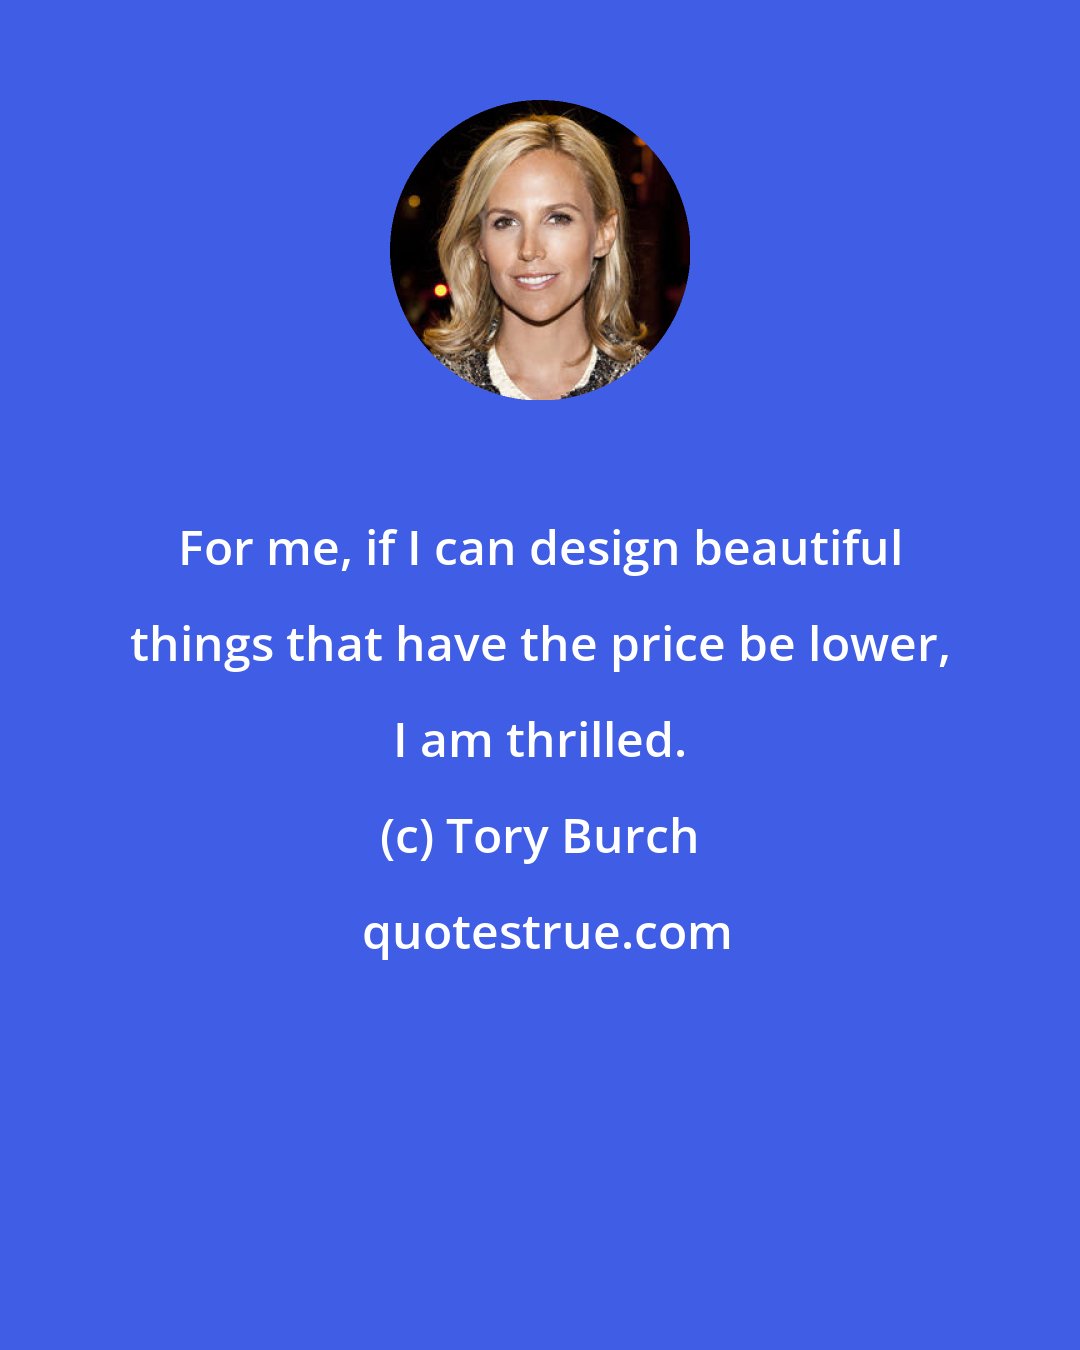 Tory Burch: For me, if I can design beautiful things that have the price be lower, I am thrilled.